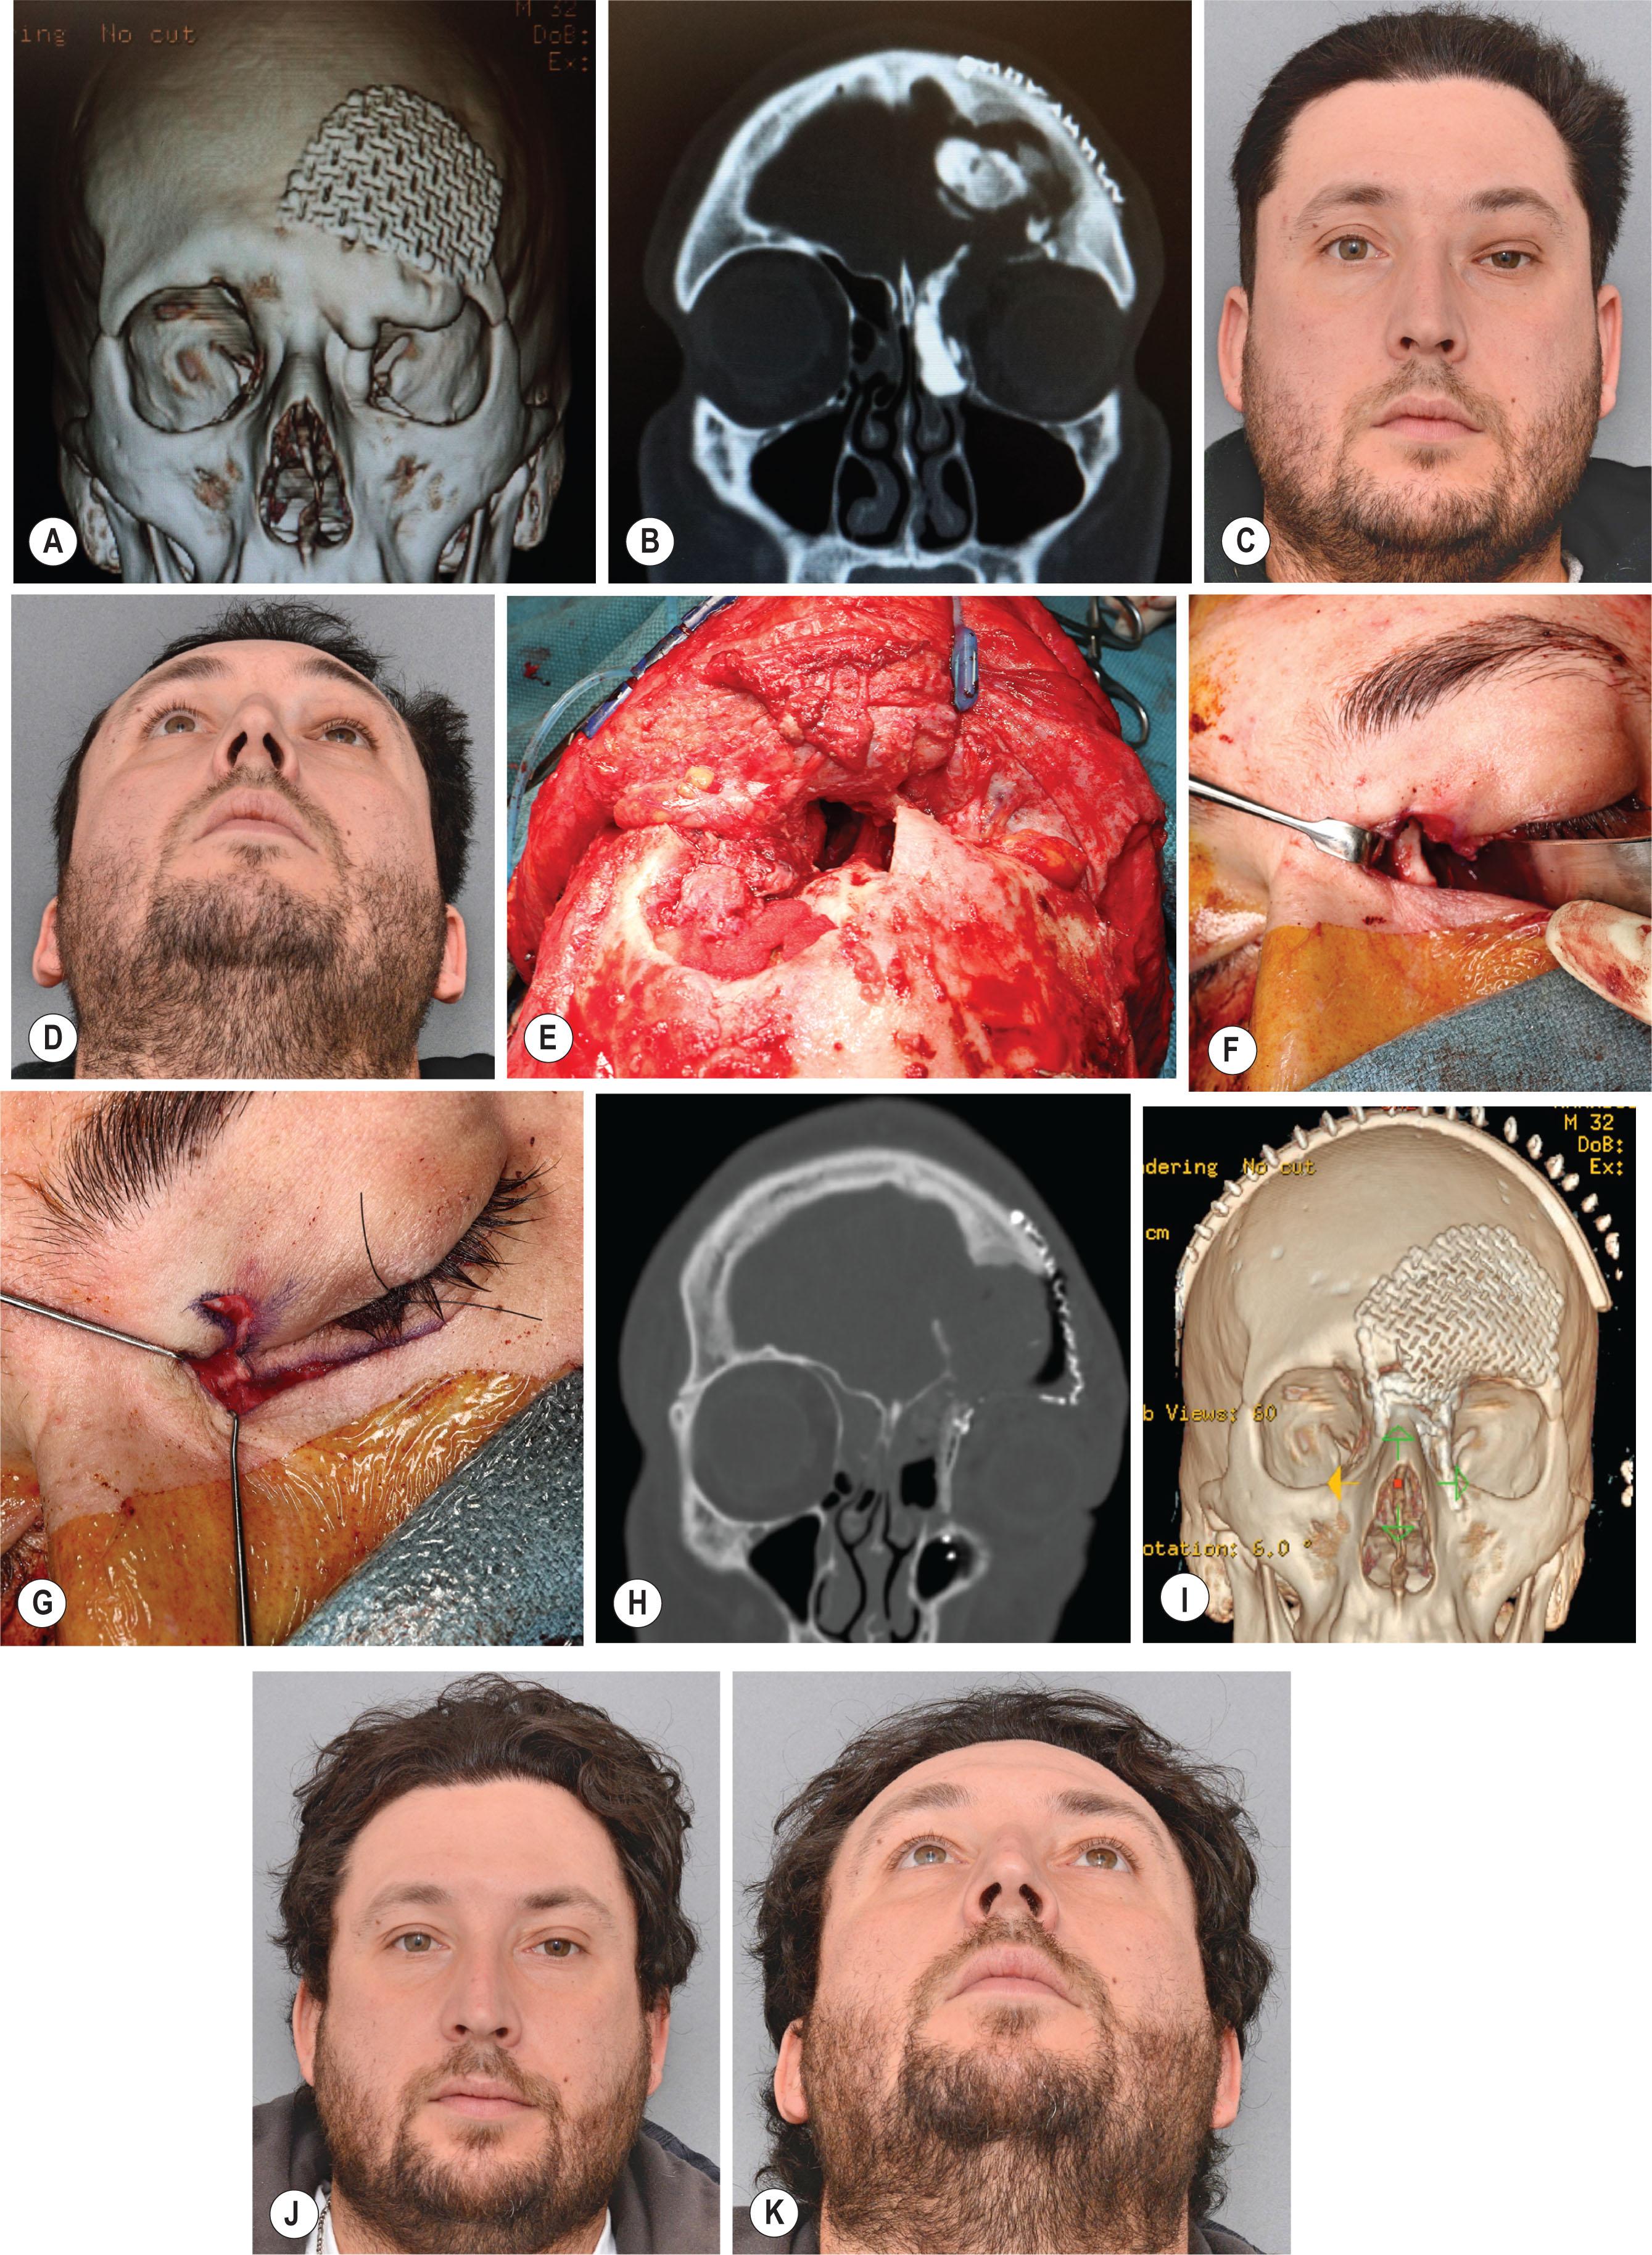 Figure 5.6, (A) A 30-year-old male with residual osteoblastoma of the left supraorbital rim and superomedial orbital cavity invading frontal sinus and ethmoid air cells. (B) Previous craniectomy elsewhere removed the frontal bone portion of tumor but left a residual expanding lesion into the left orbit and nasoethmoid regions. (C) Residual tumor in the left superomedial orbital rim caused left inferior and lateral displacement of the left globe. However, the defect in the left orbital roof allowed prolapse of orbital soft tissues into the anterior cranial fossa, with resulting left enophthalmos (D) . (E) Surgery involved a combined intra-/extracranial approach to permit retraction of cranial and orbital contents for radical excision of the residual osteoblastoma. Split calvarial bone graft was used to reconstruct the medial orbital rim and wall (F) , providing a secure fixation point for medial canthoplasty (G) . (H) Postoperative CT scan demonstrated good position of the medial orbital bone graft and titanium mesh employed in orbital roof reconstruction. (I) 3D CT scan demonstrated the skull reconstruction using patient-specific titanium mesh for the “unknown” or intra-operative defect. Postoperative images demonstrate restoration of symmetrical globe position (J) and projection (K) .